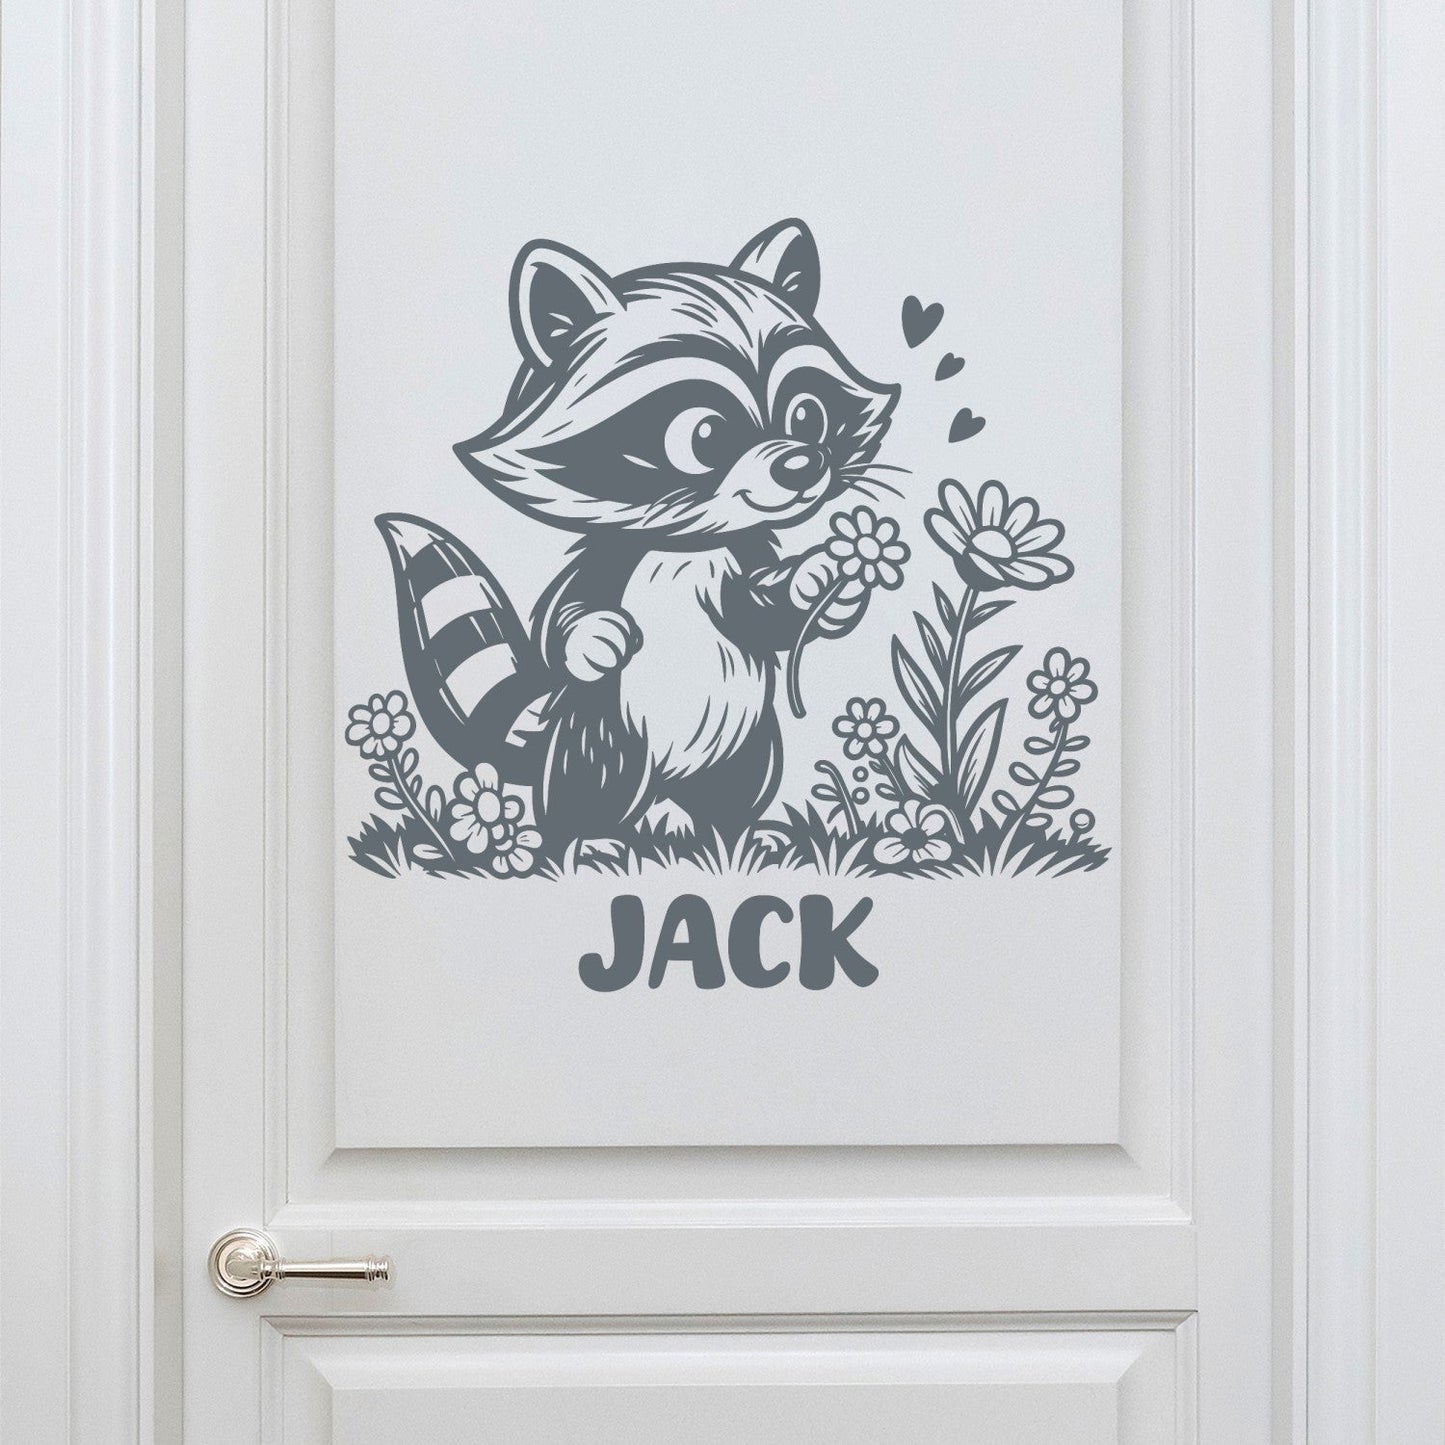 Raccoon Wall Decal with Kids Name - Baby Room Wall Decals Name - Personalized Name Wall Decal - Name Stickers for Wall Decor - Racoon Stickers for Wall